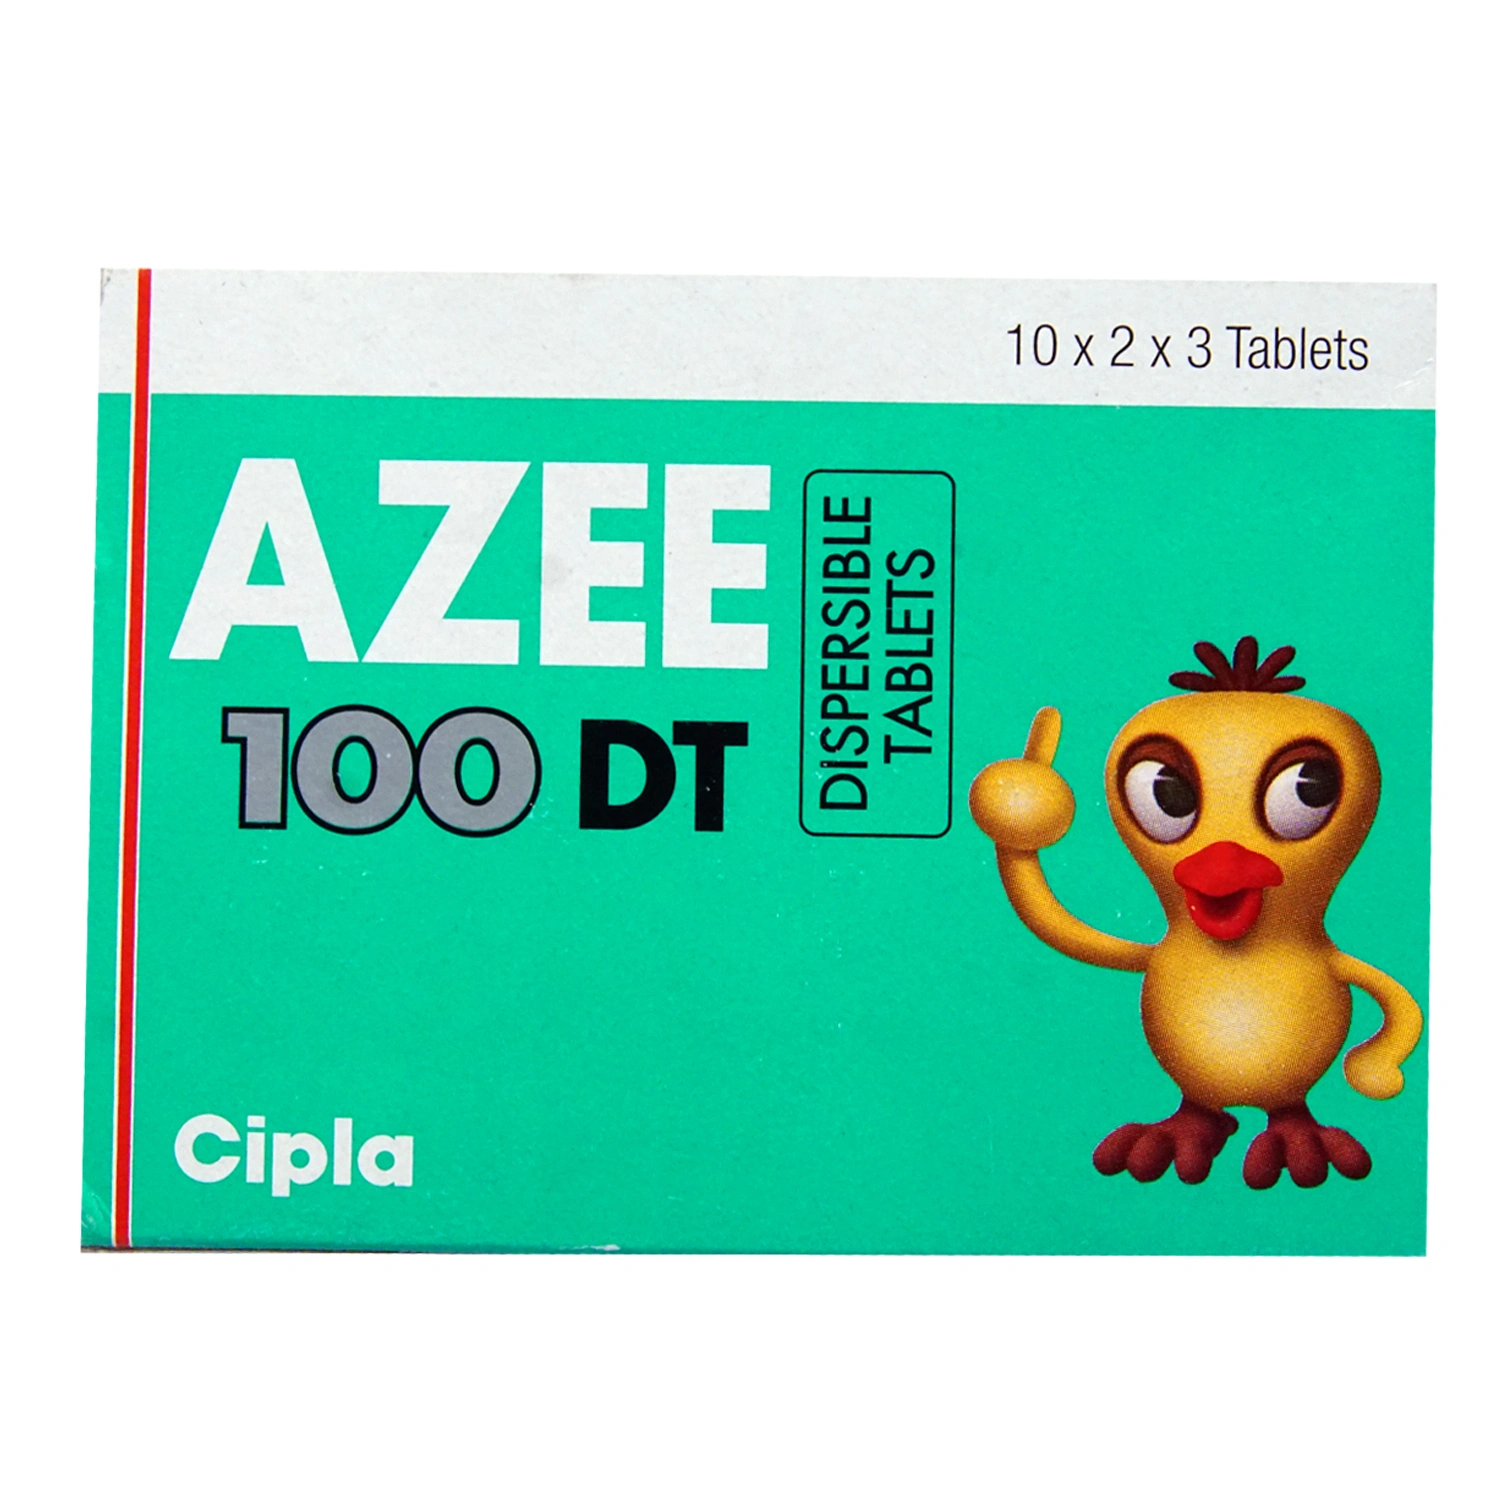 Azee 100mg Tablet DT